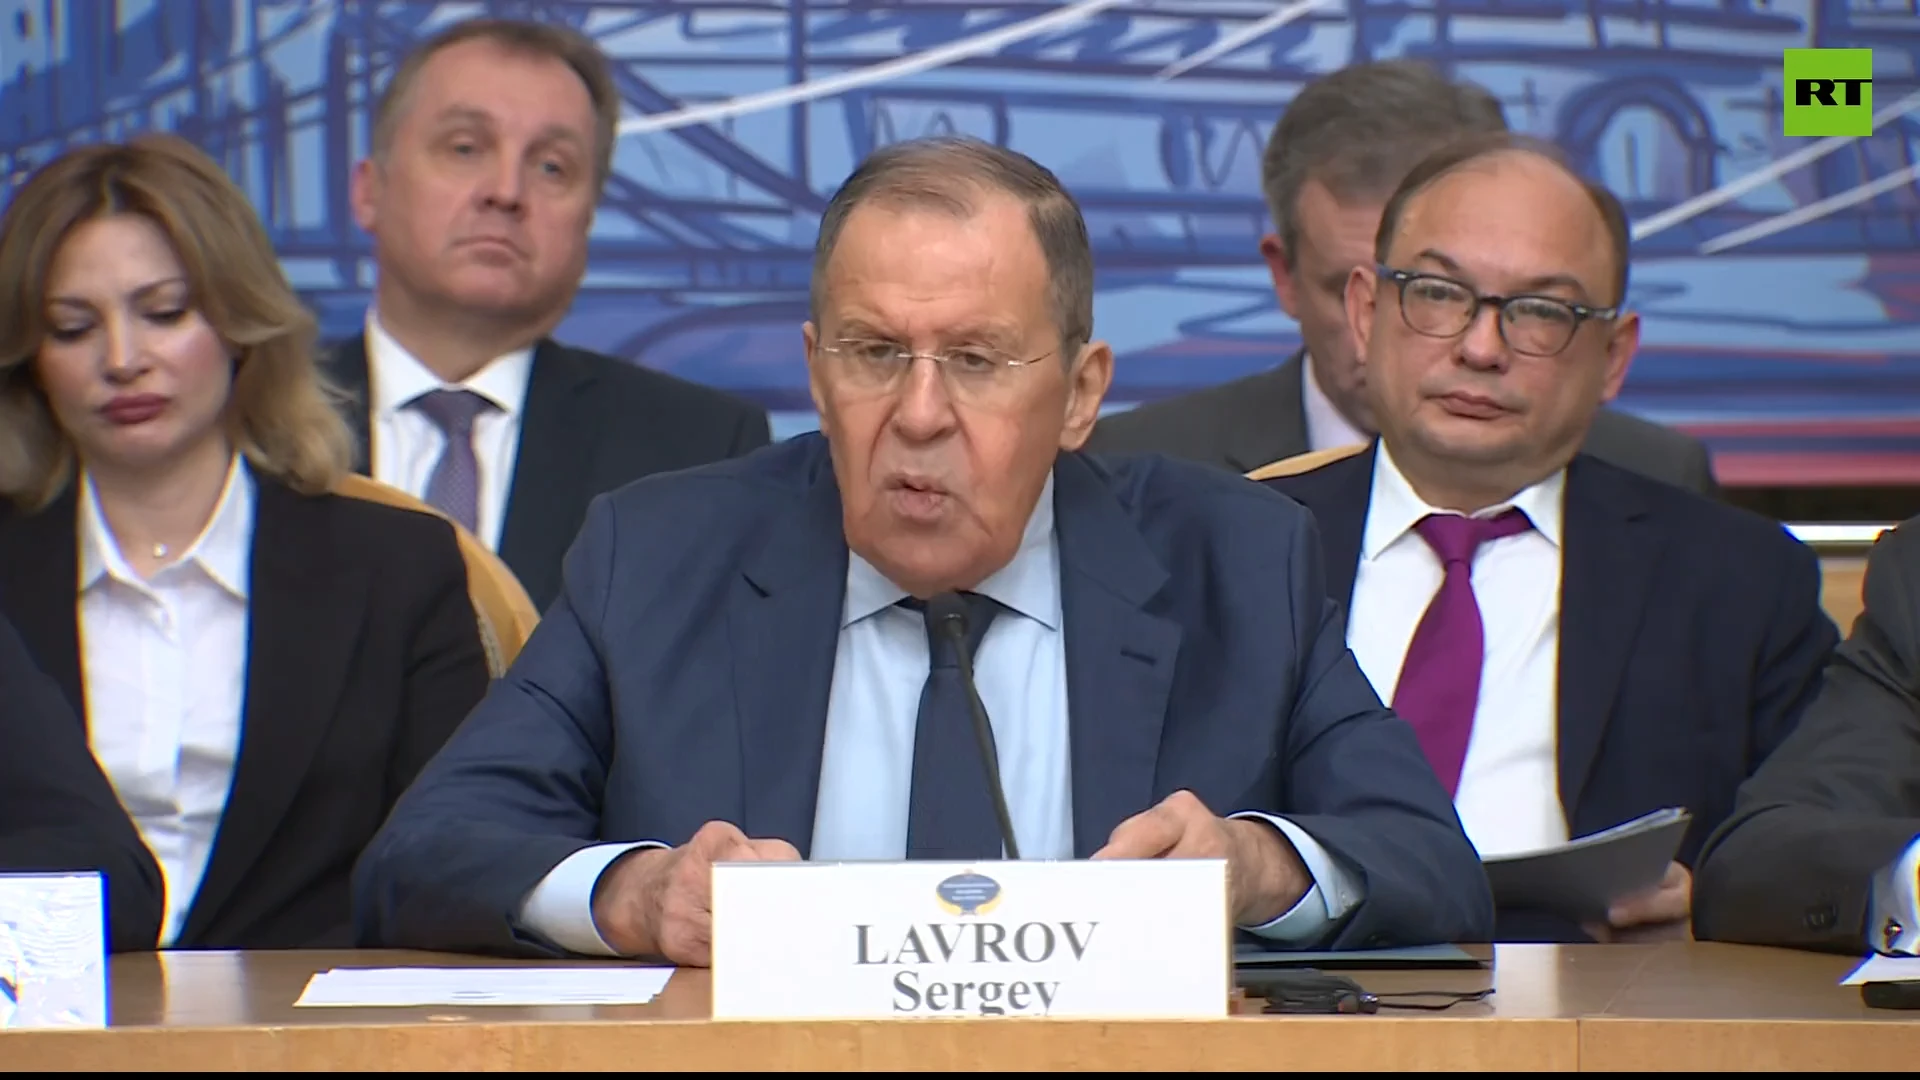 West wants to provoke unrest around the globe – Lavrov